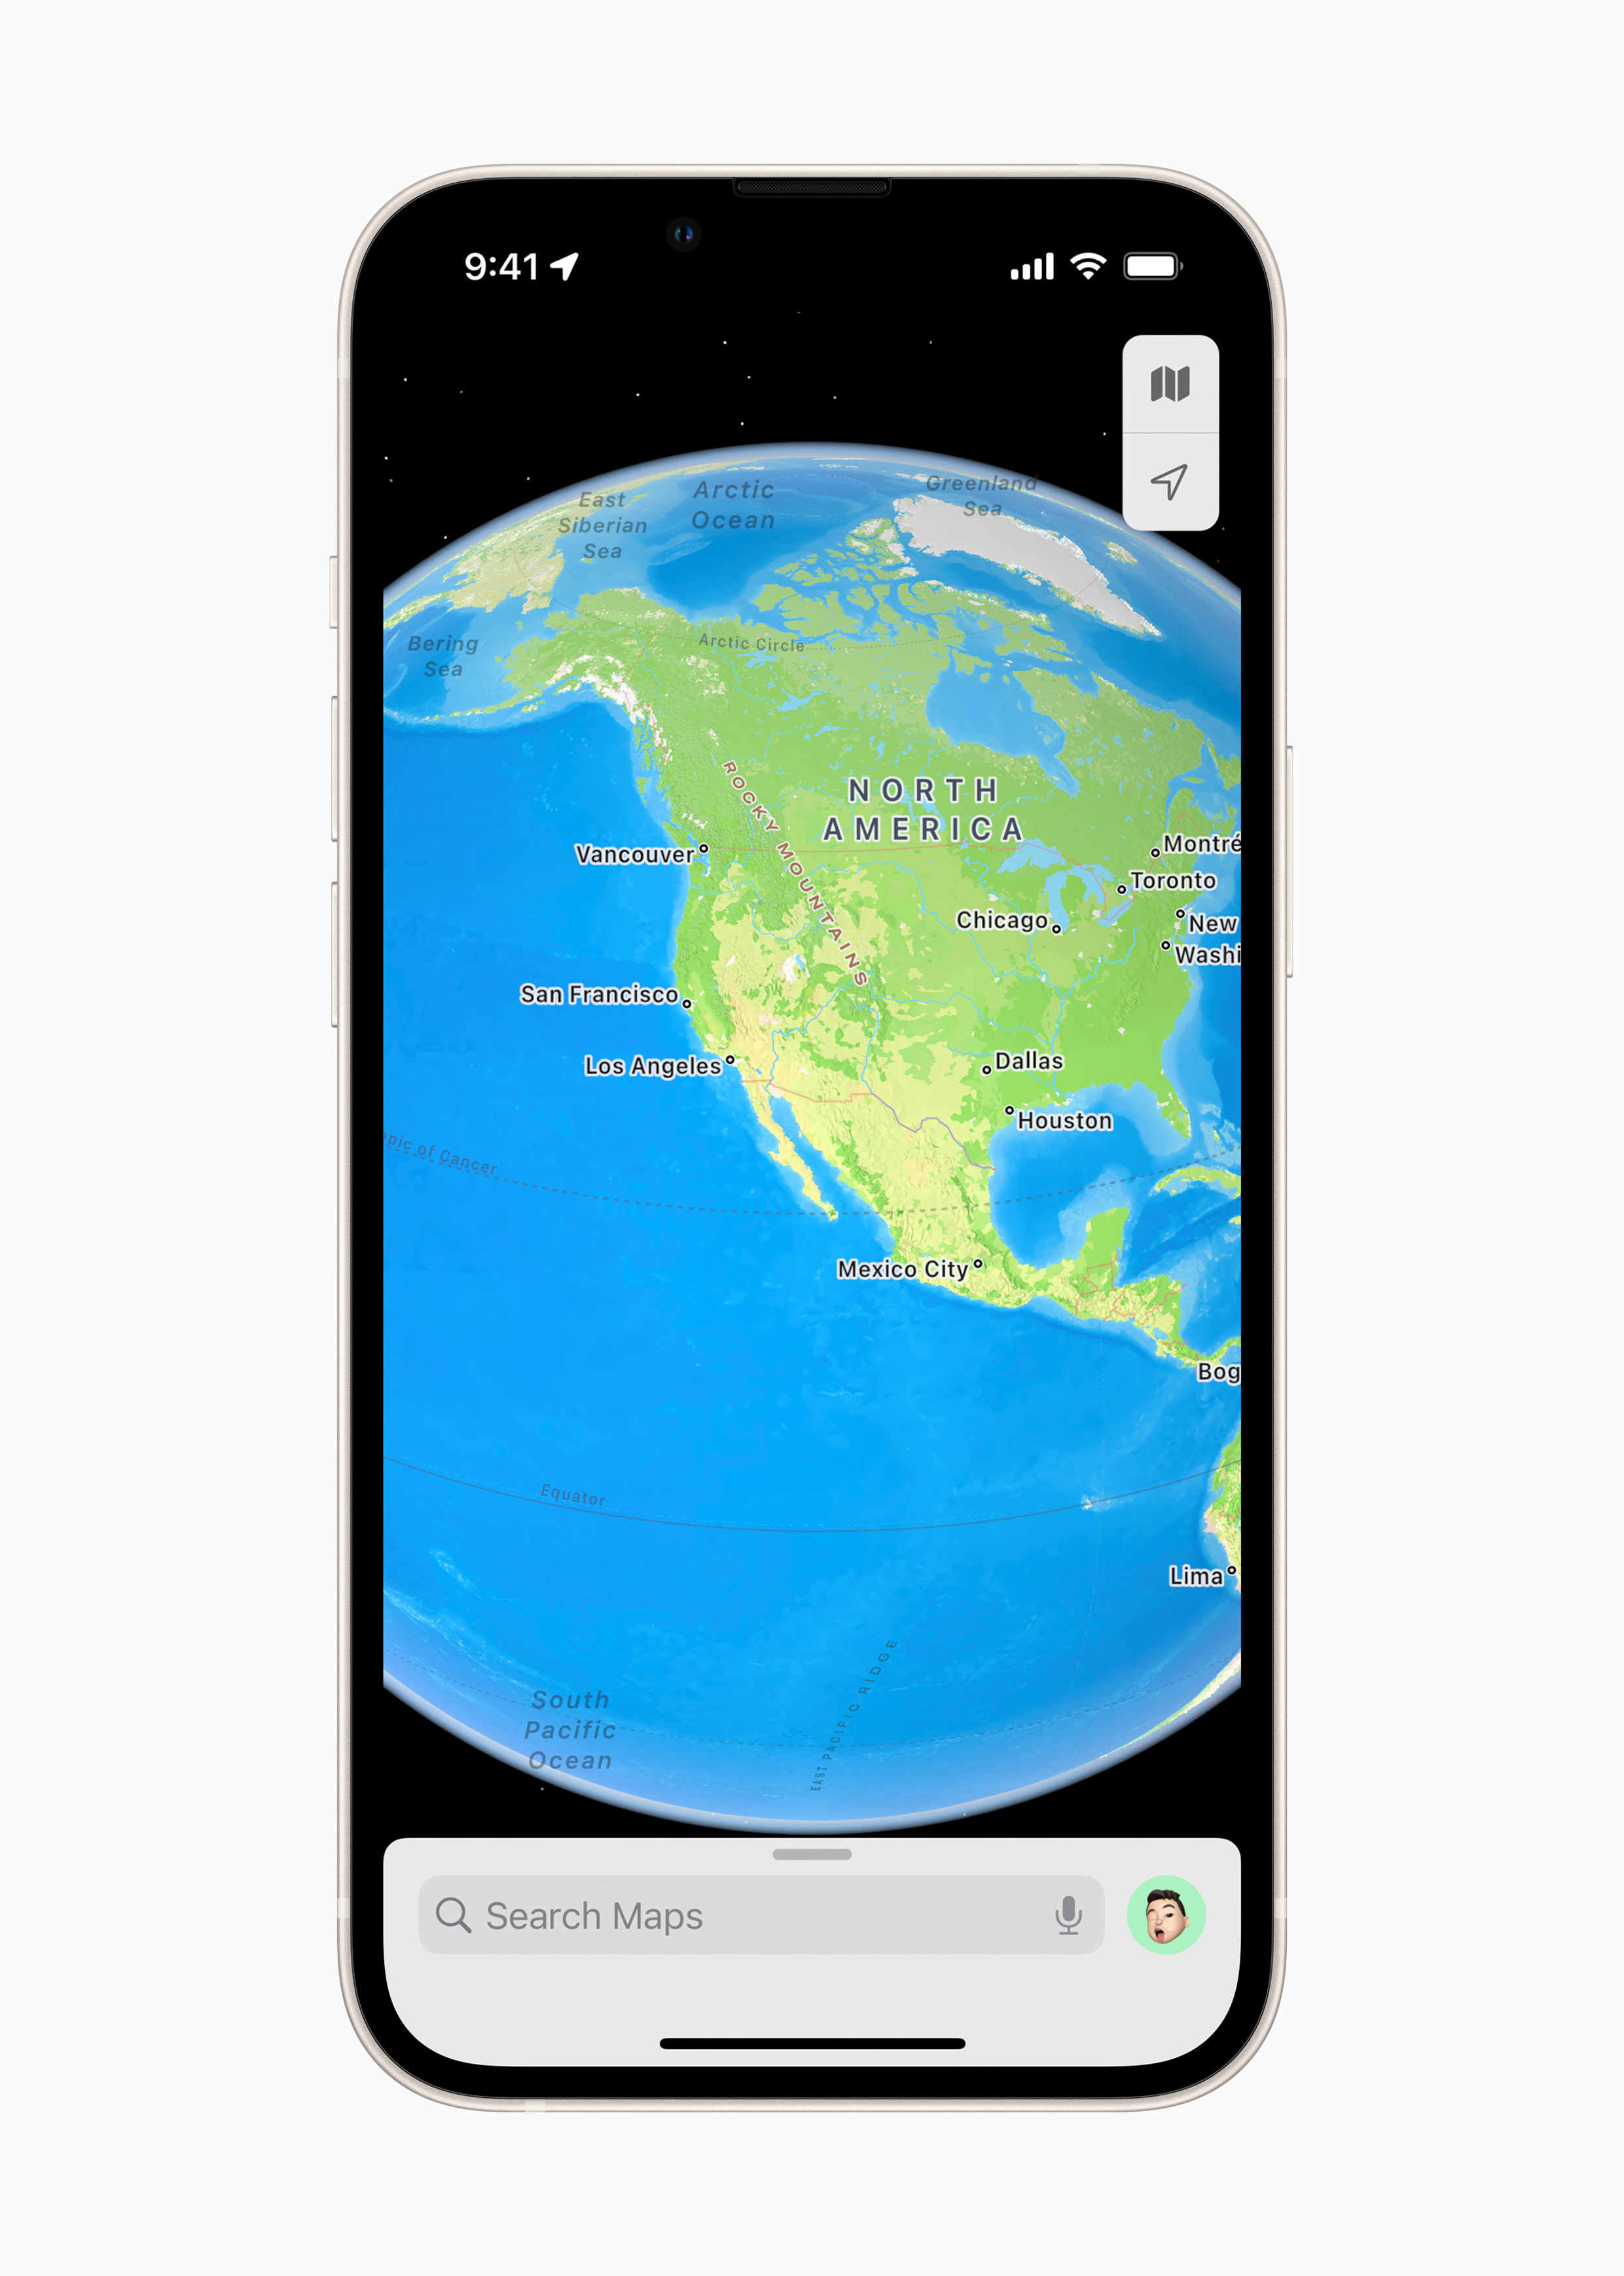 Apple Maps introduces new ways to explore major cities in 3D Apple